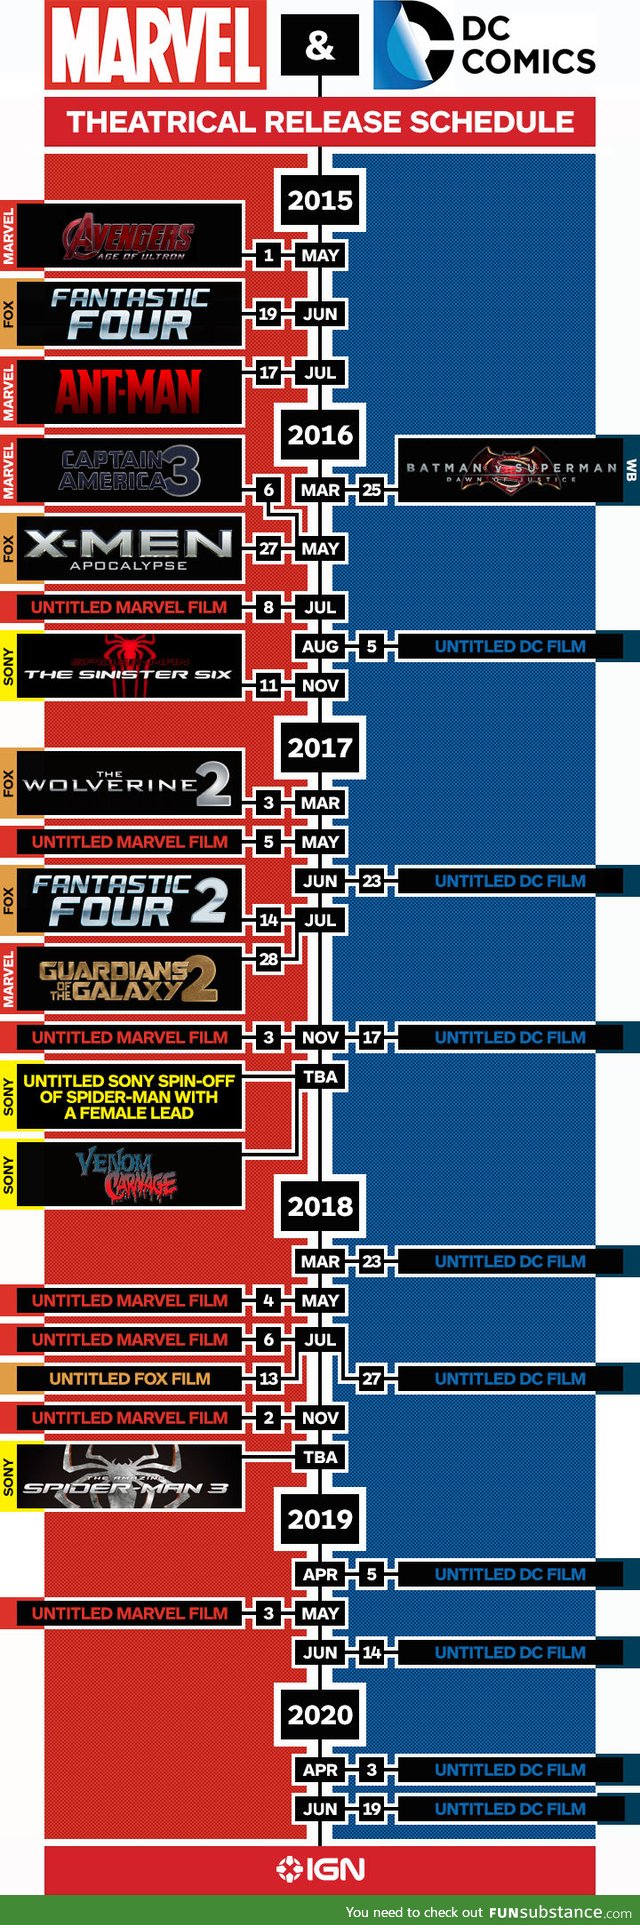 Upcoming Marvel and DC movies